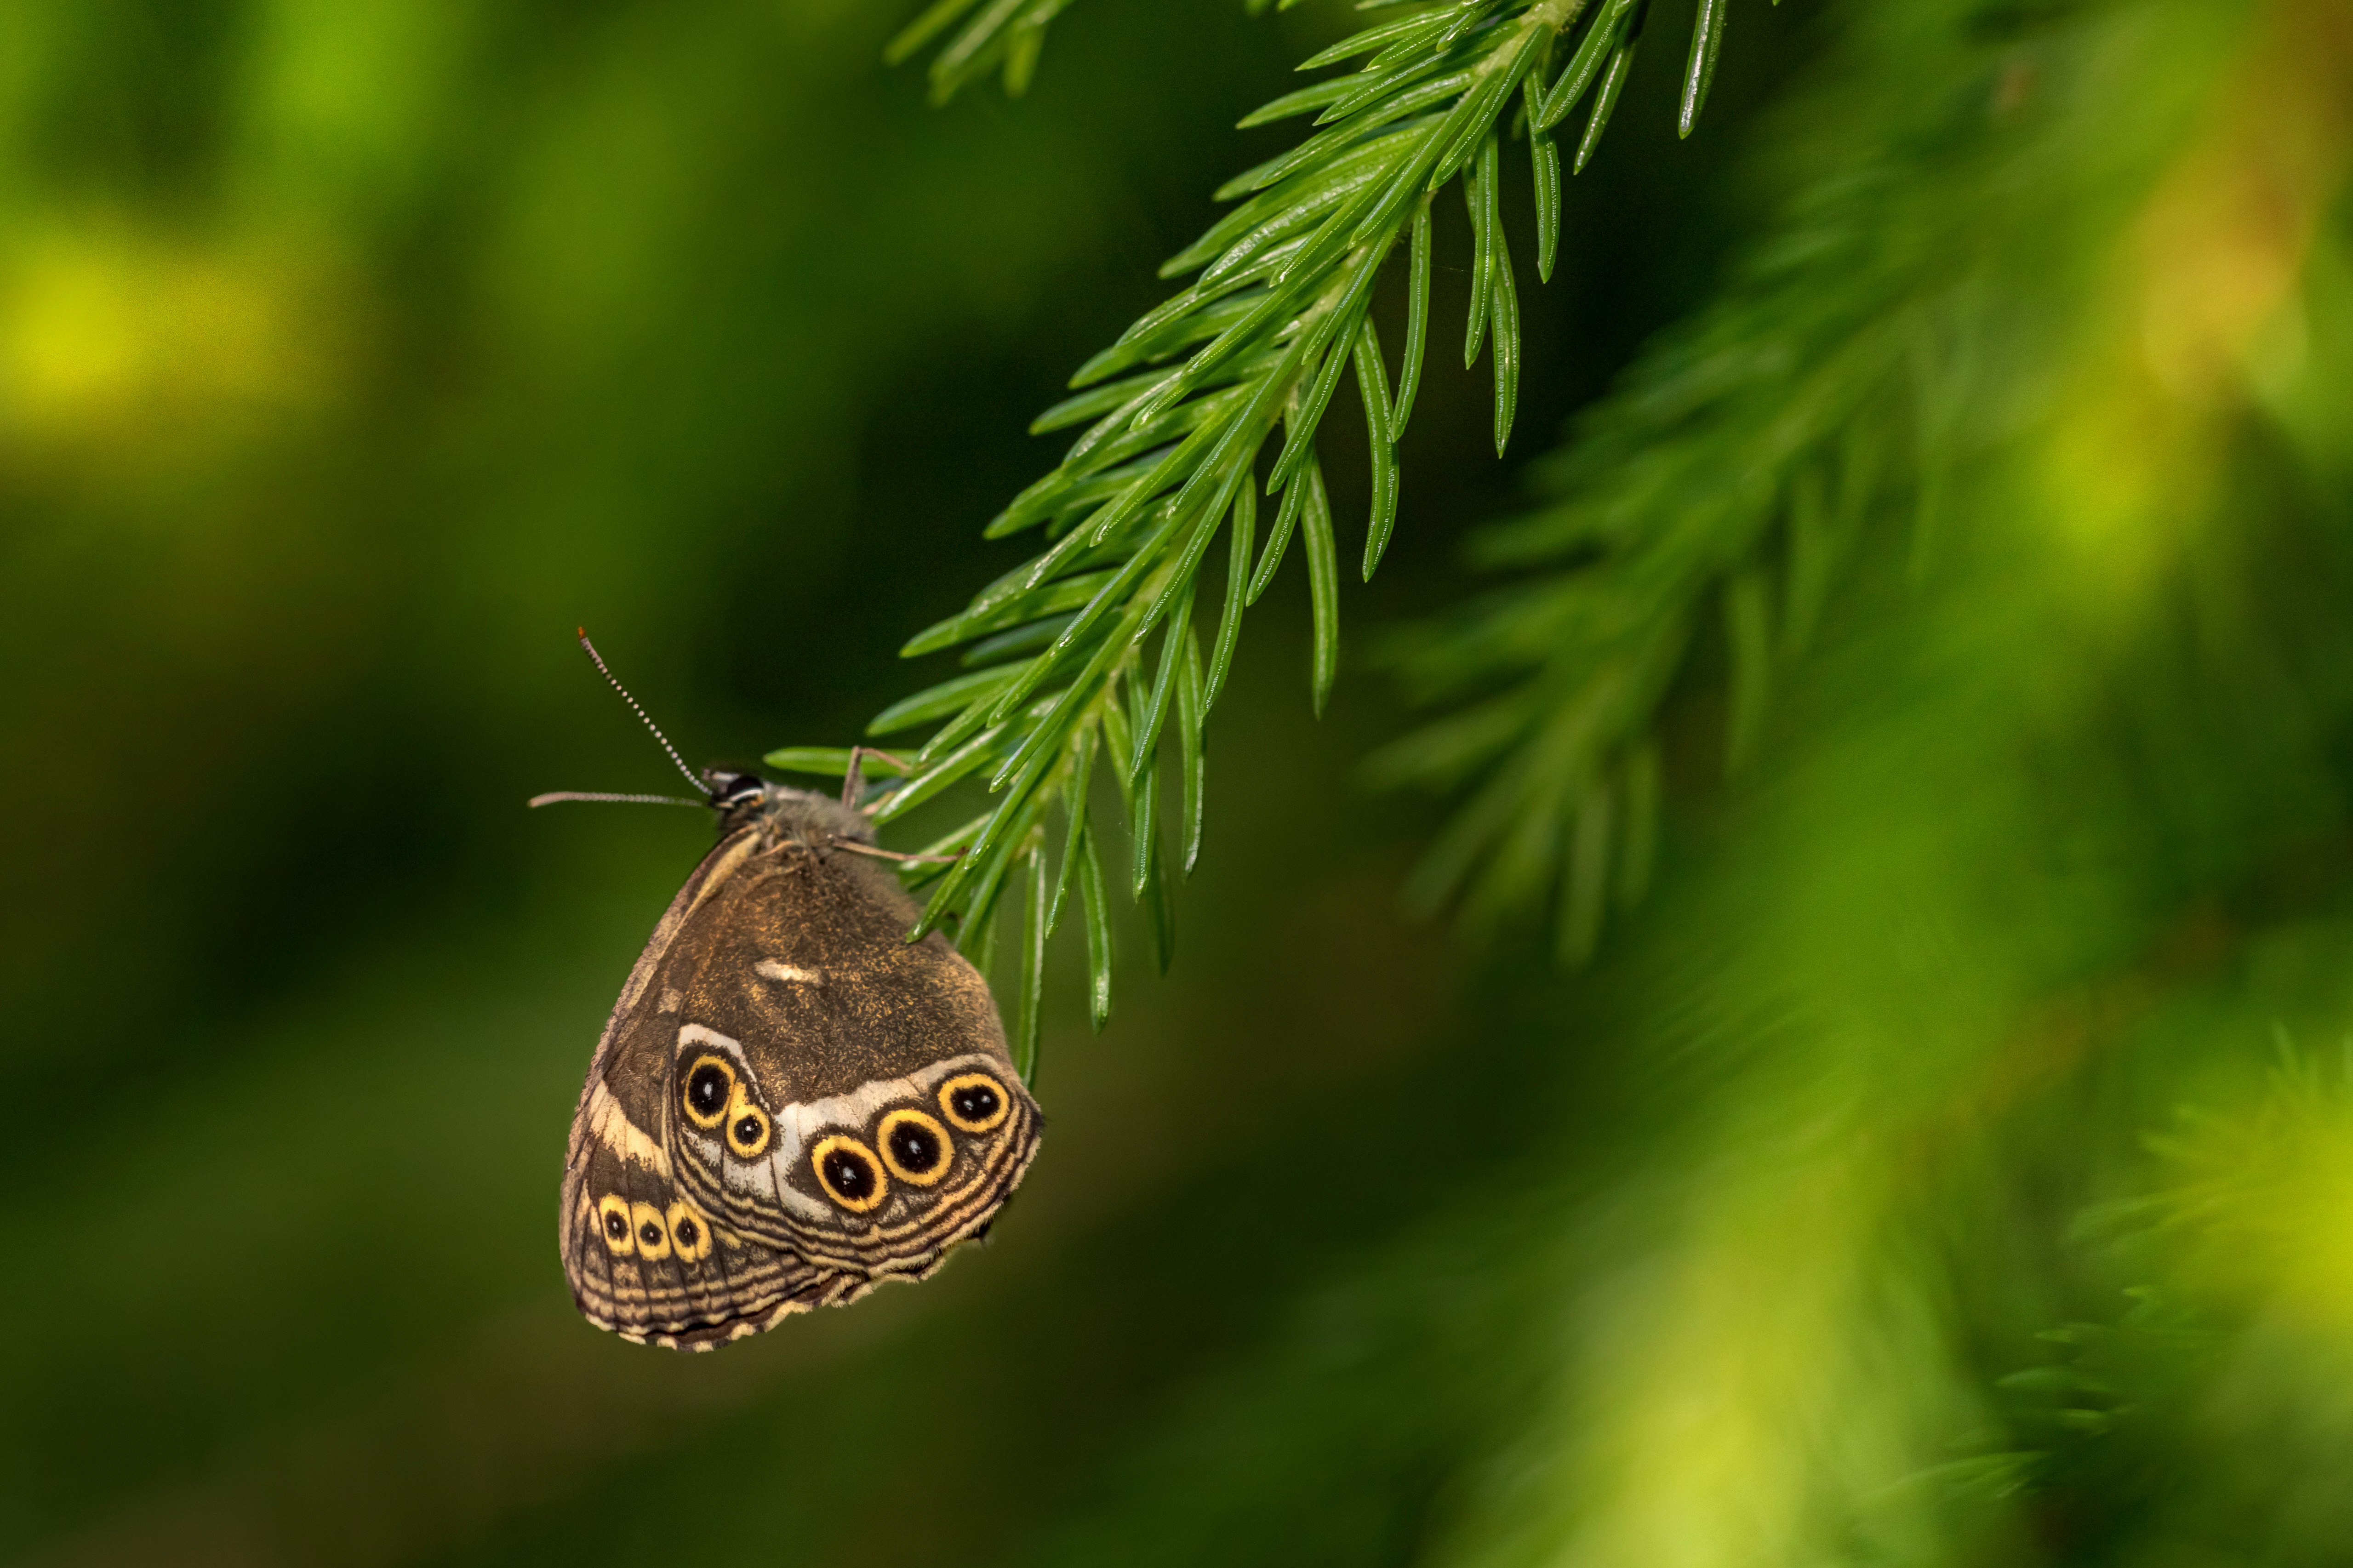 brown and black butterfly perched on green leaf in close up photography during daytime